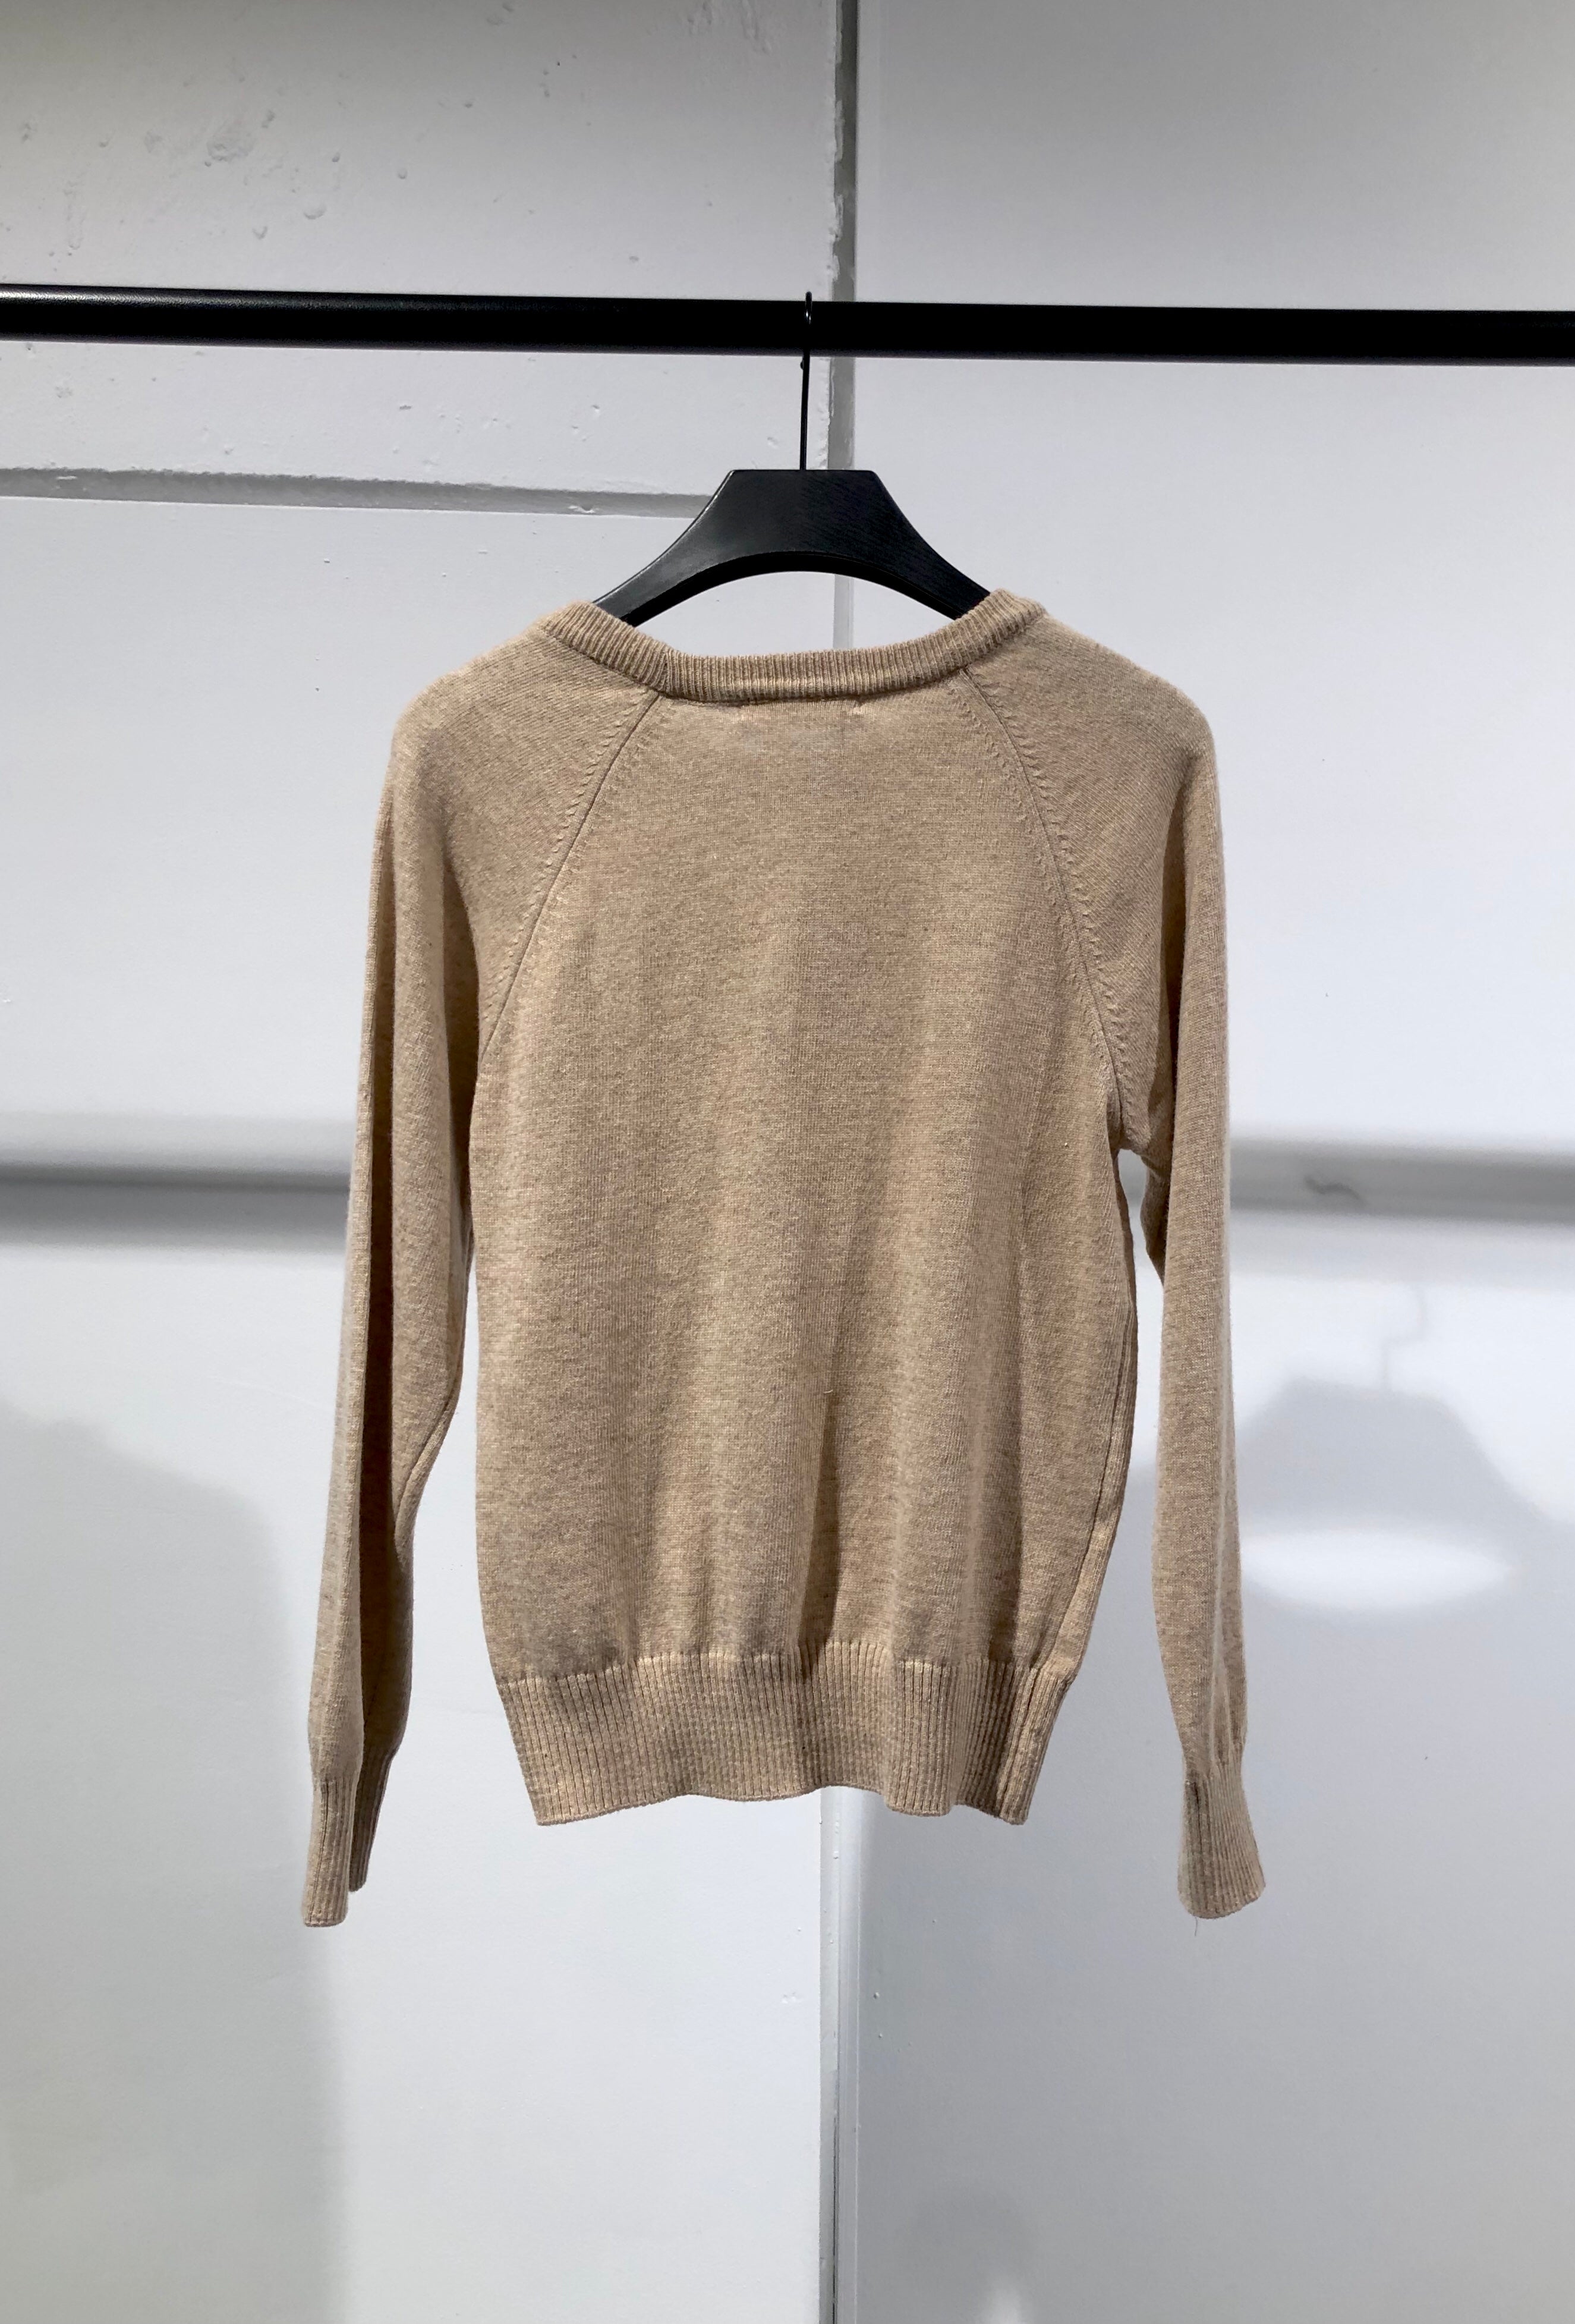 MyYoung Cashmere Knit Top